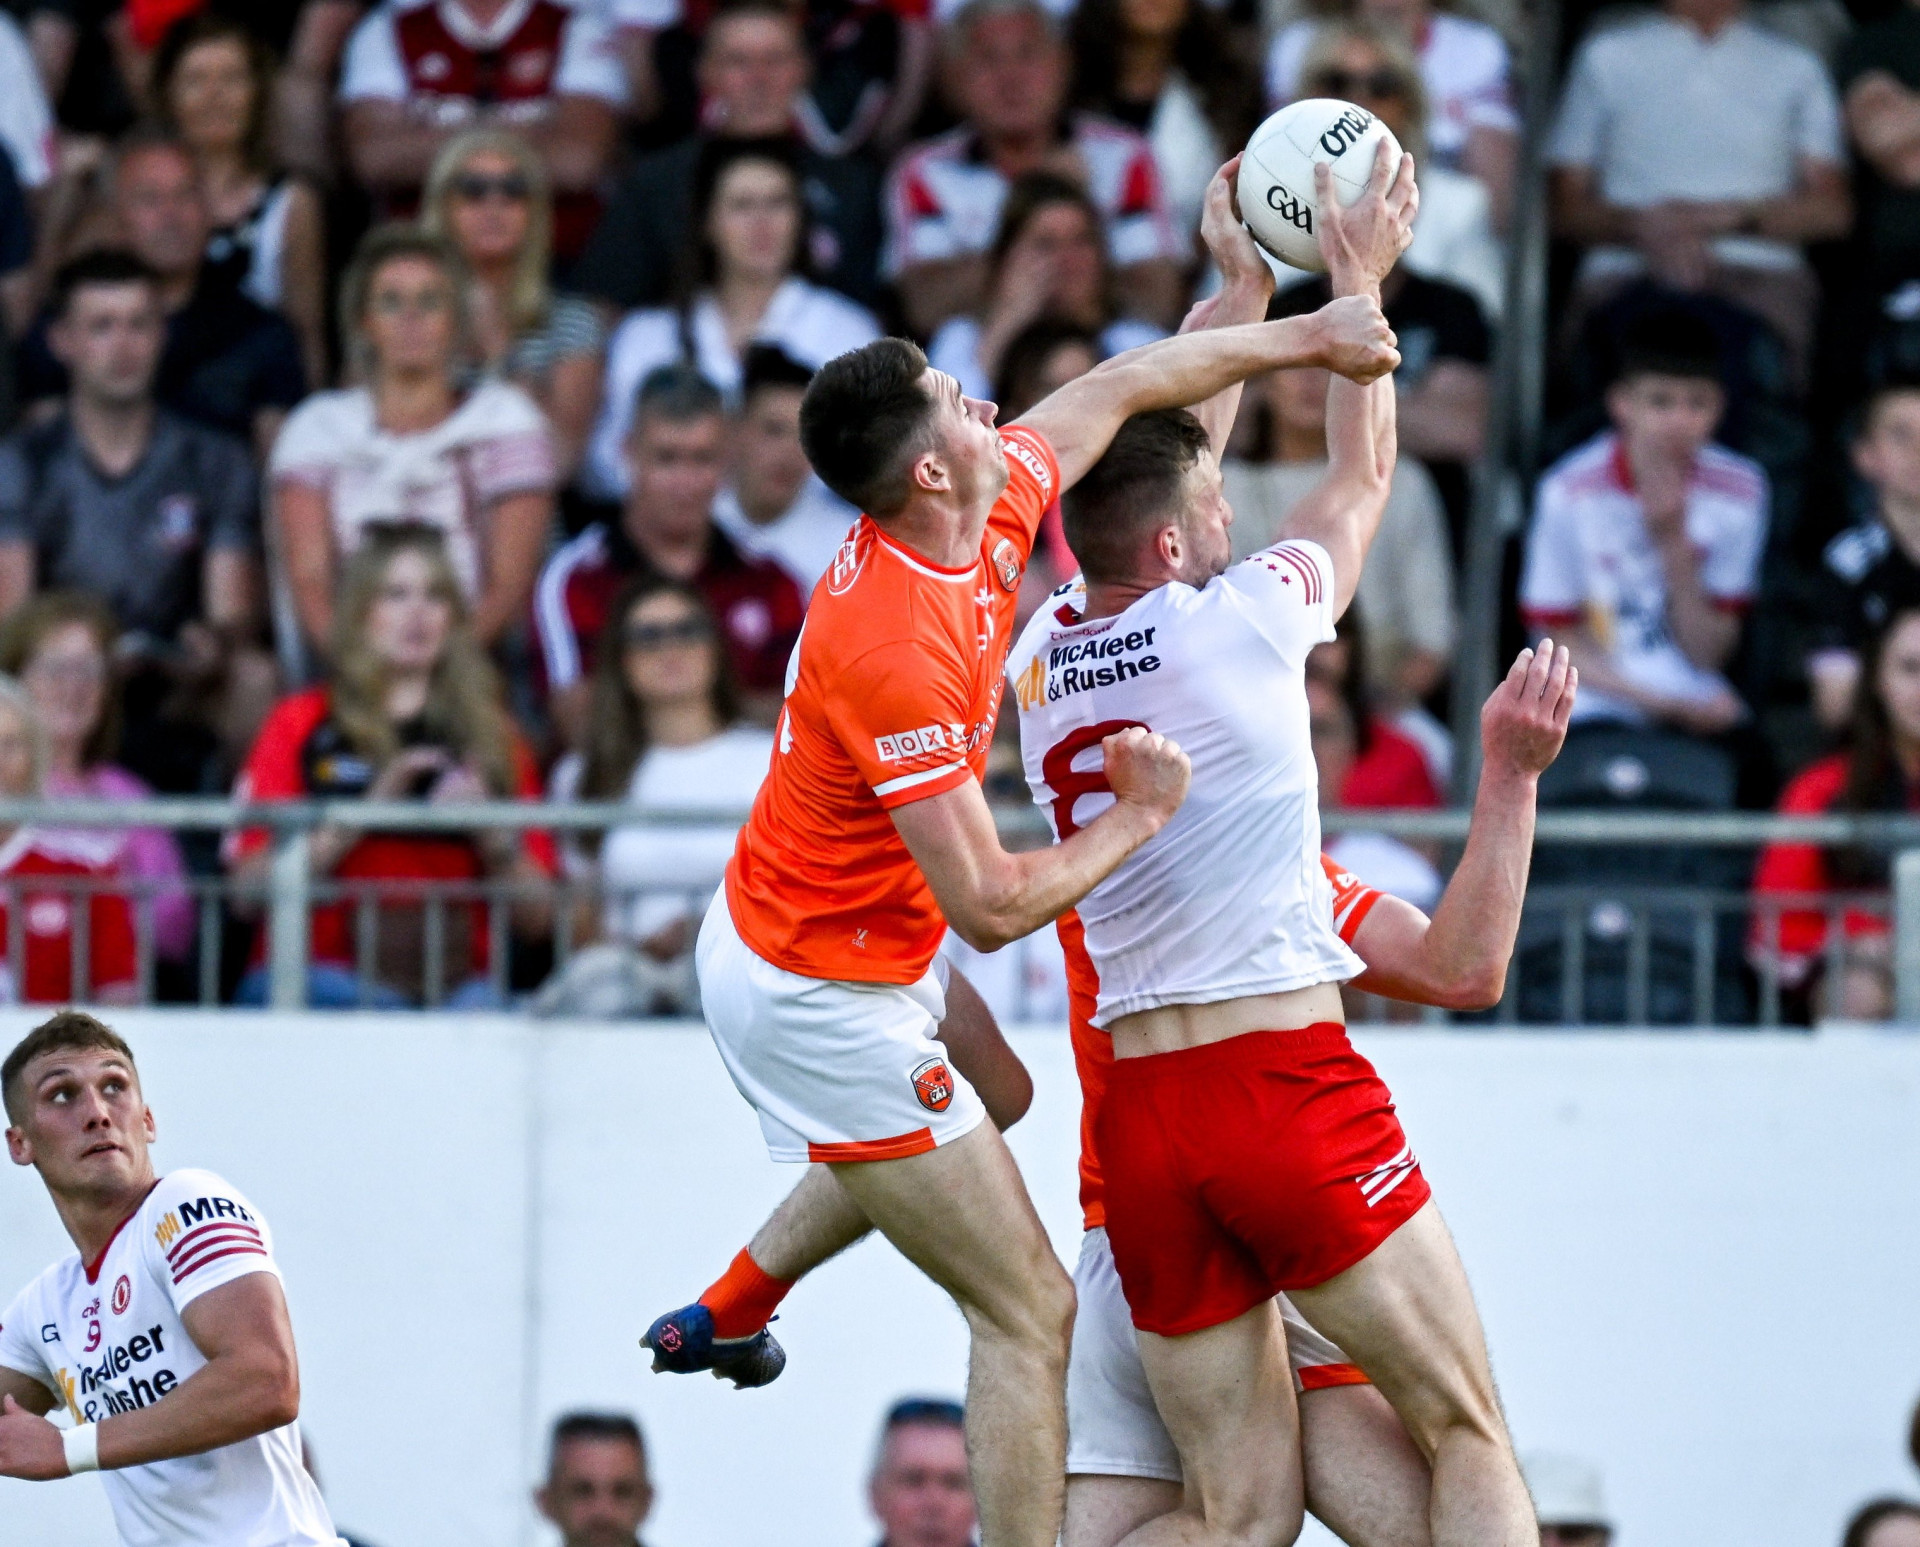 Defeat to Armagh would have been unthinkable-Kennedy